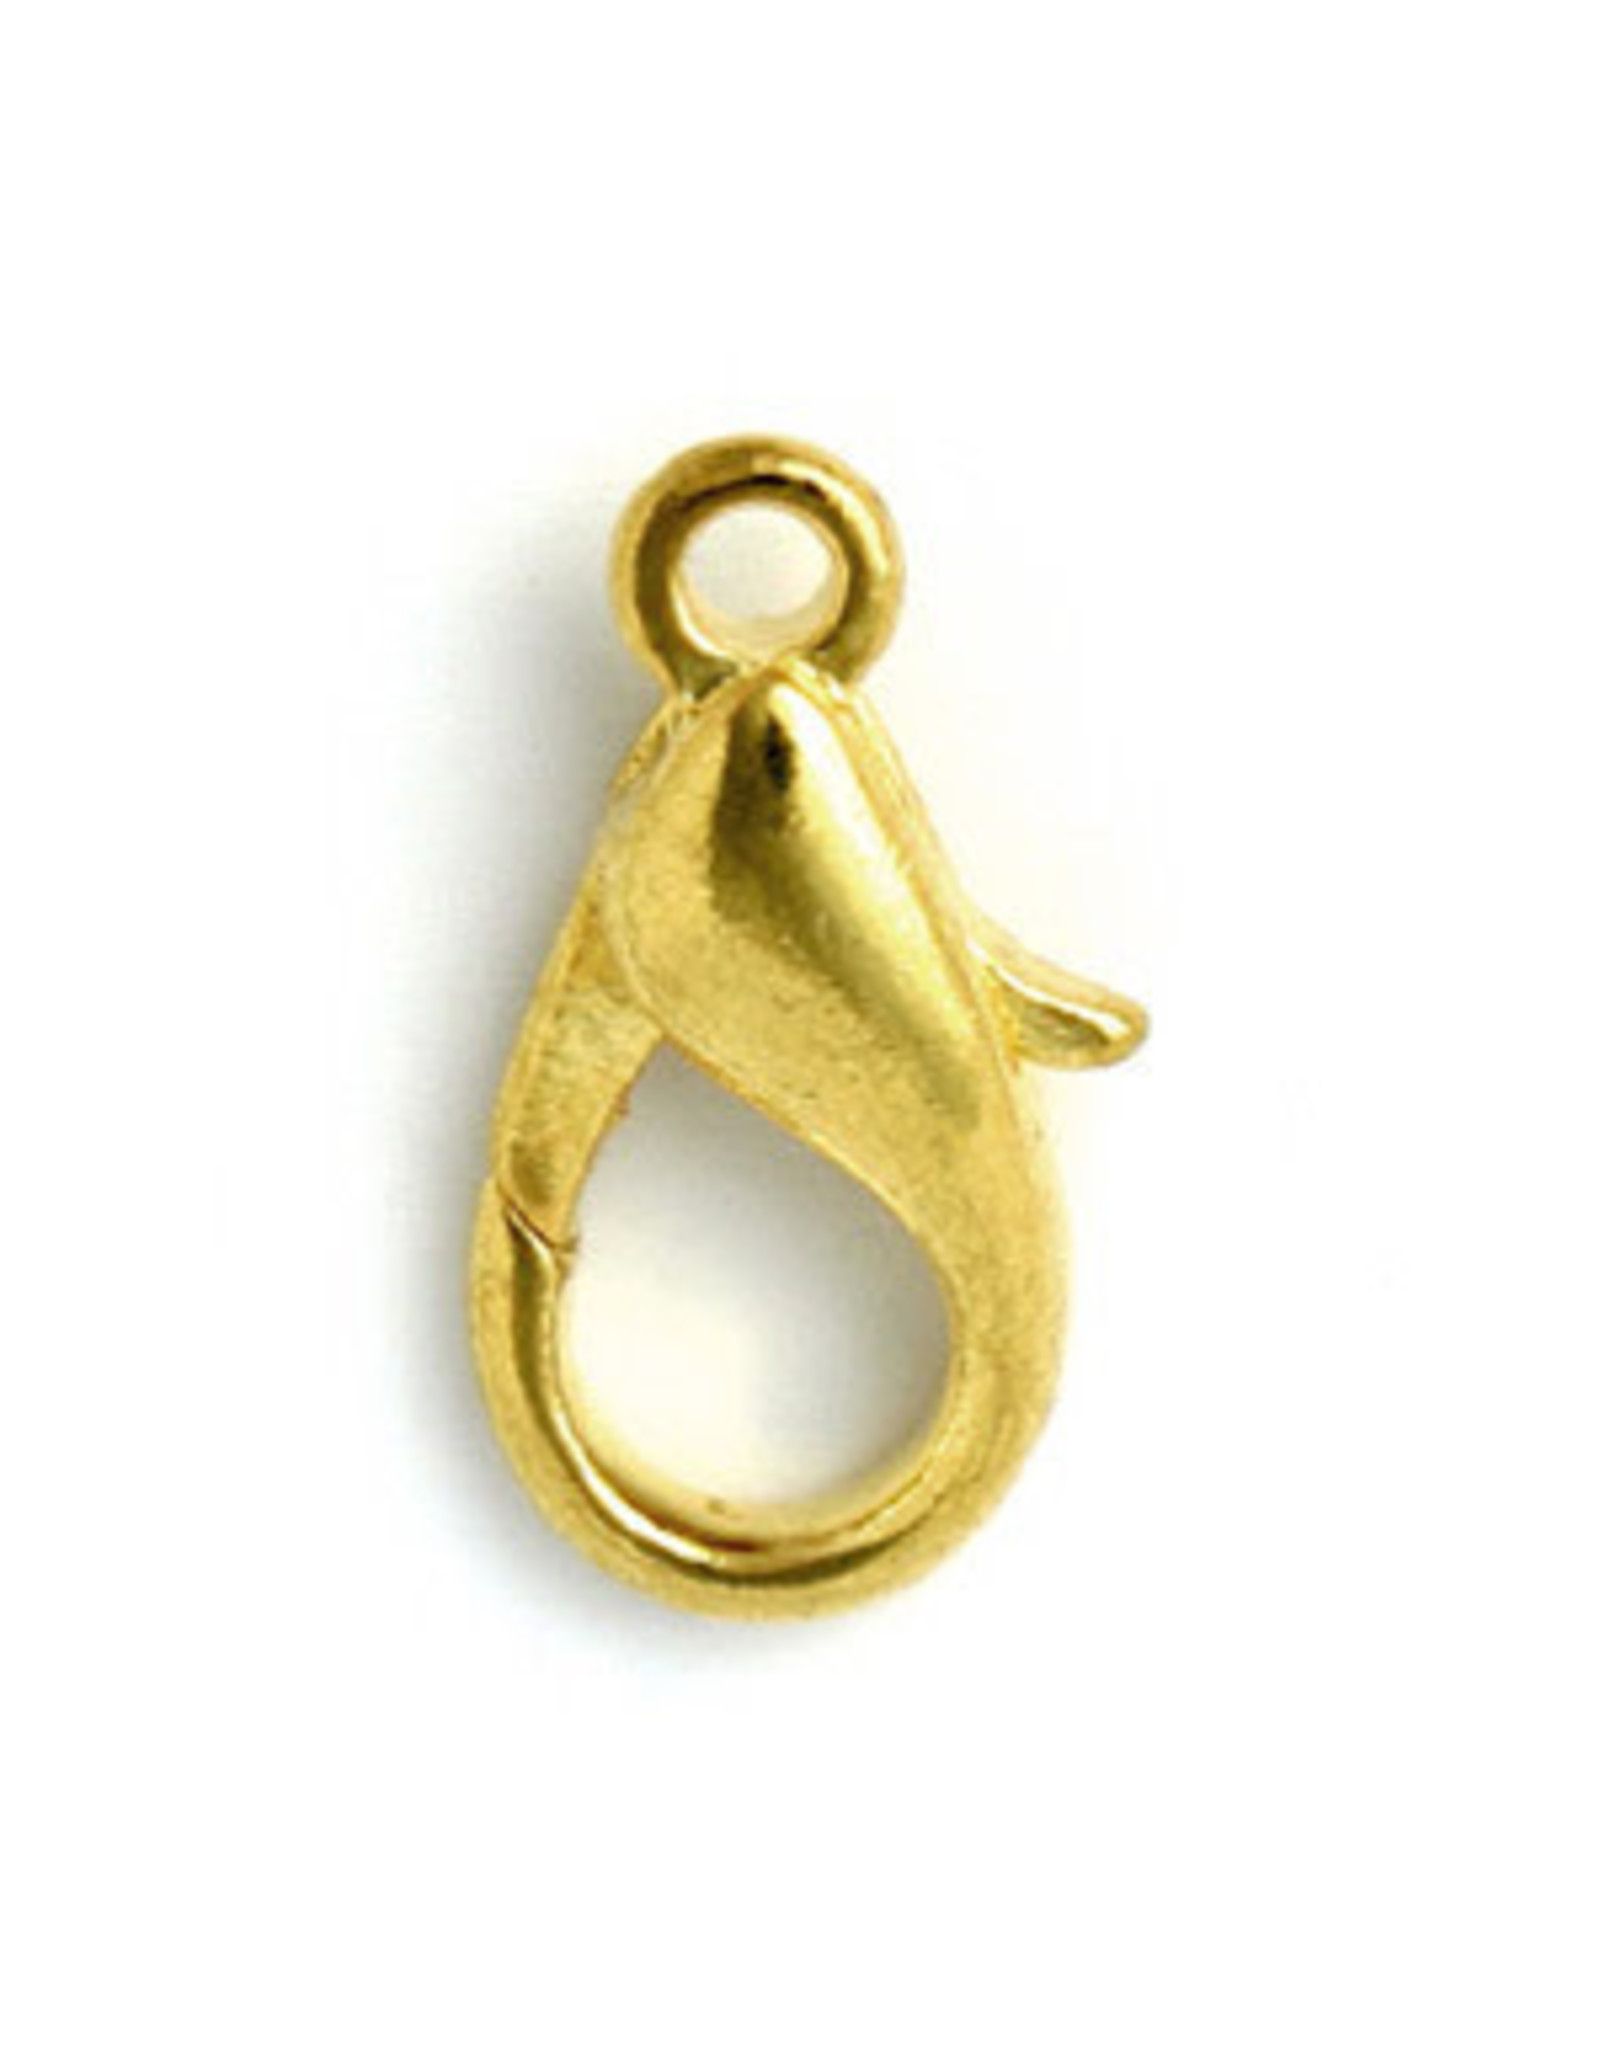 Lobster Clasp 18mm Gold x25 NF